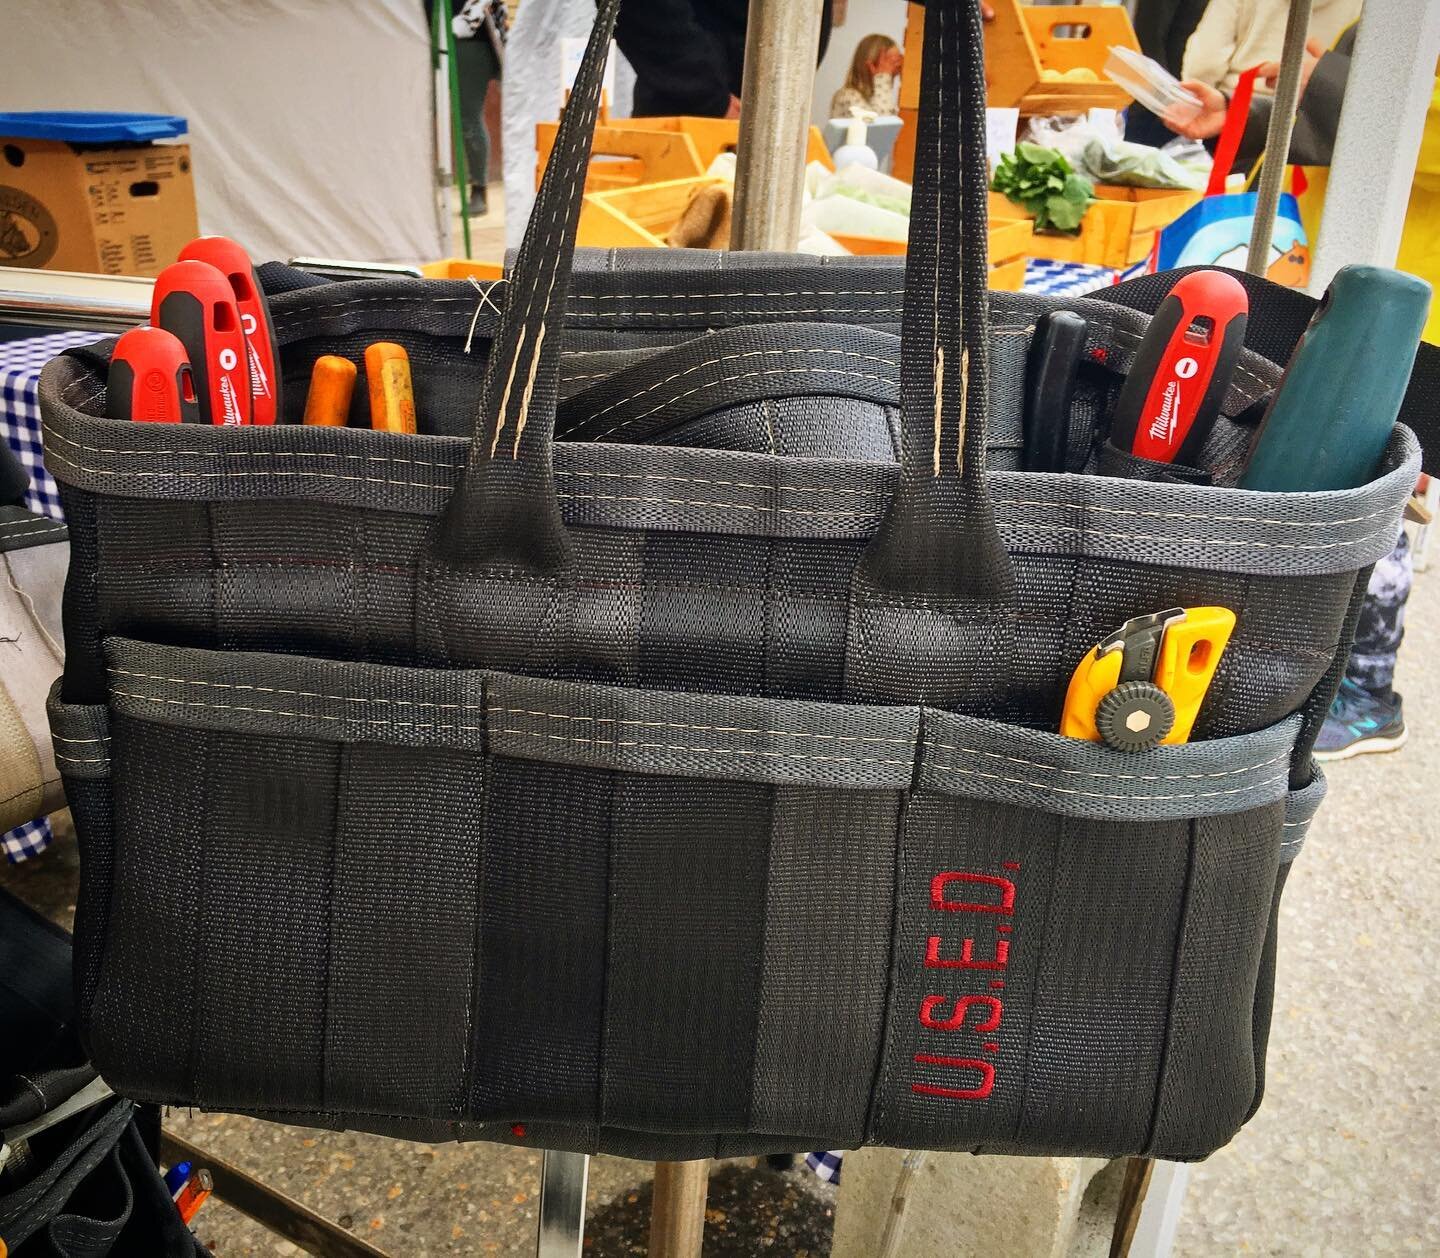 Our first Farmers Market in FOREVER was a great success! Even got the chance to show off our new tool bags (made from a combination of @cnh_industrial weld drum straps and retired safety harnesses !

Come by on the 21st May to see them with your own 